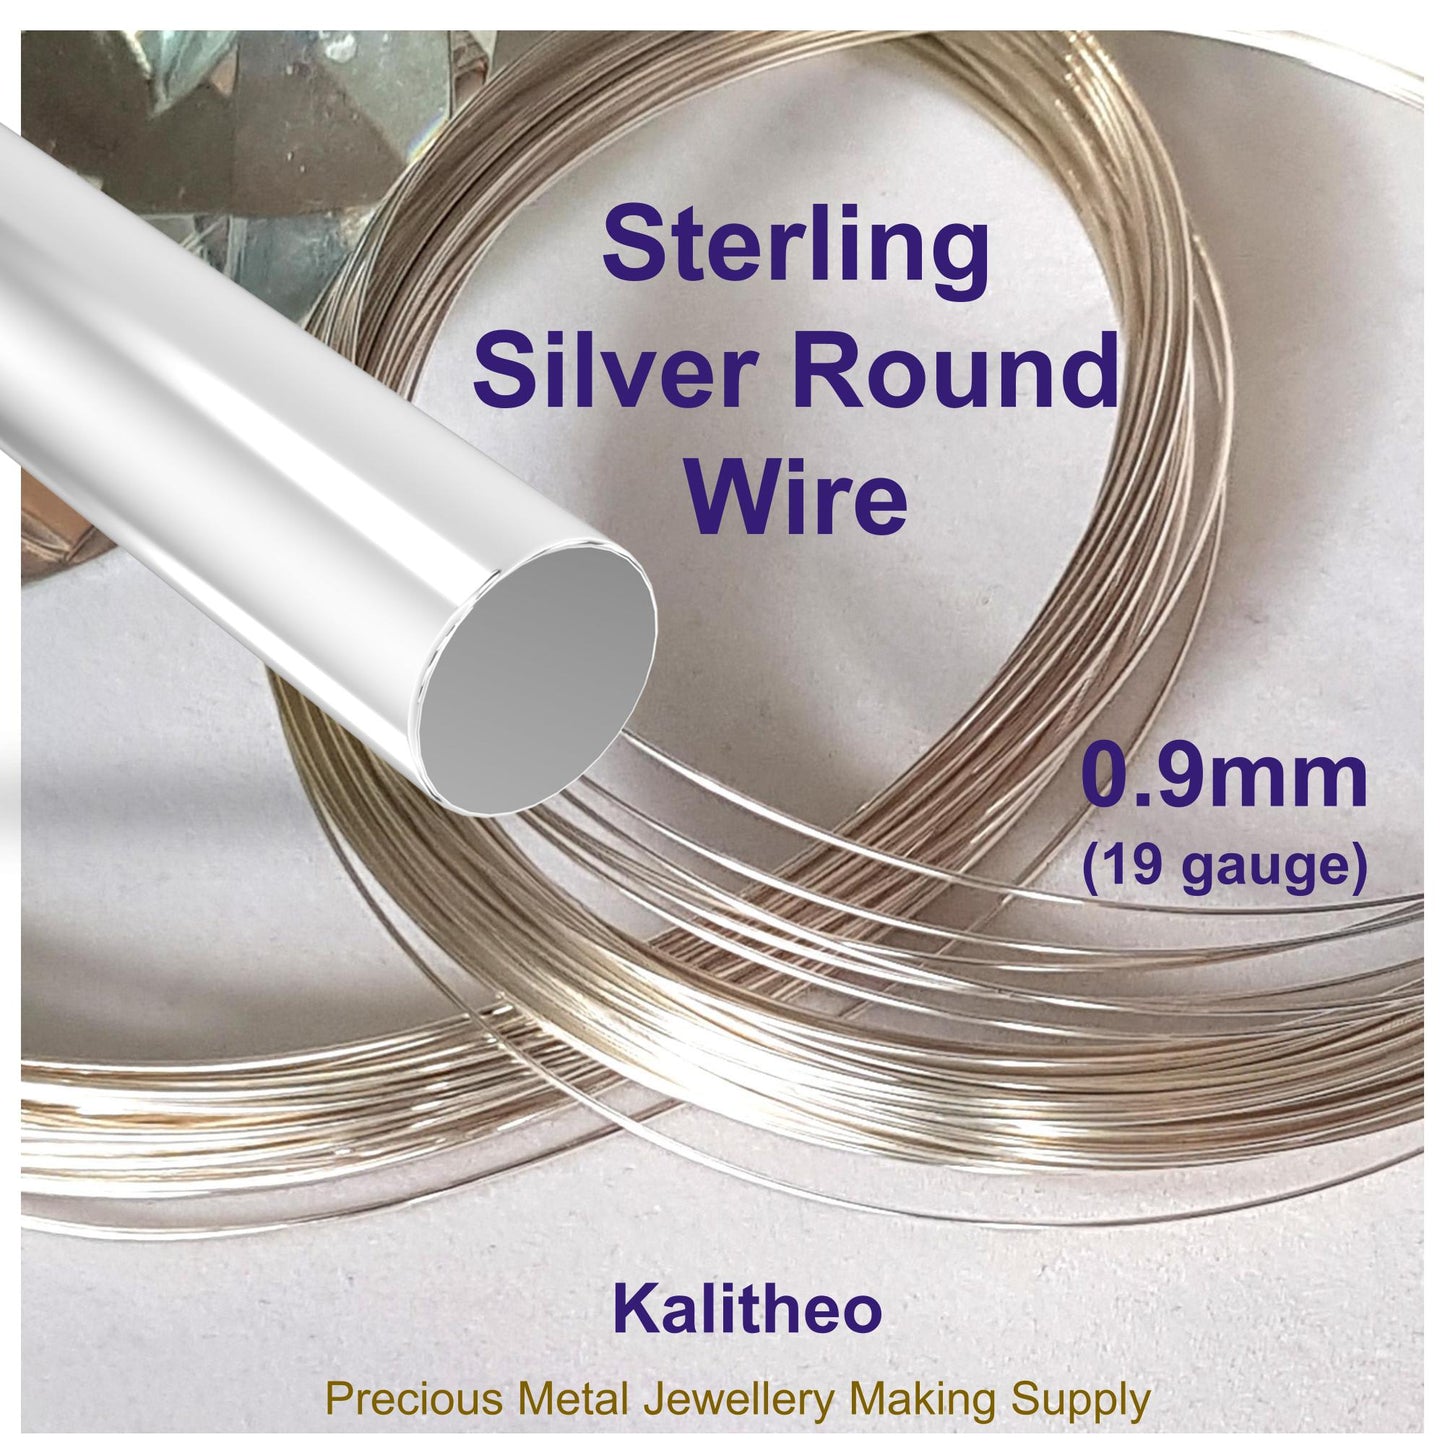 FAB Metals - 0.9mm Round Sterling Silver Wire ( 19 gauge) | Jewellery Making Supply